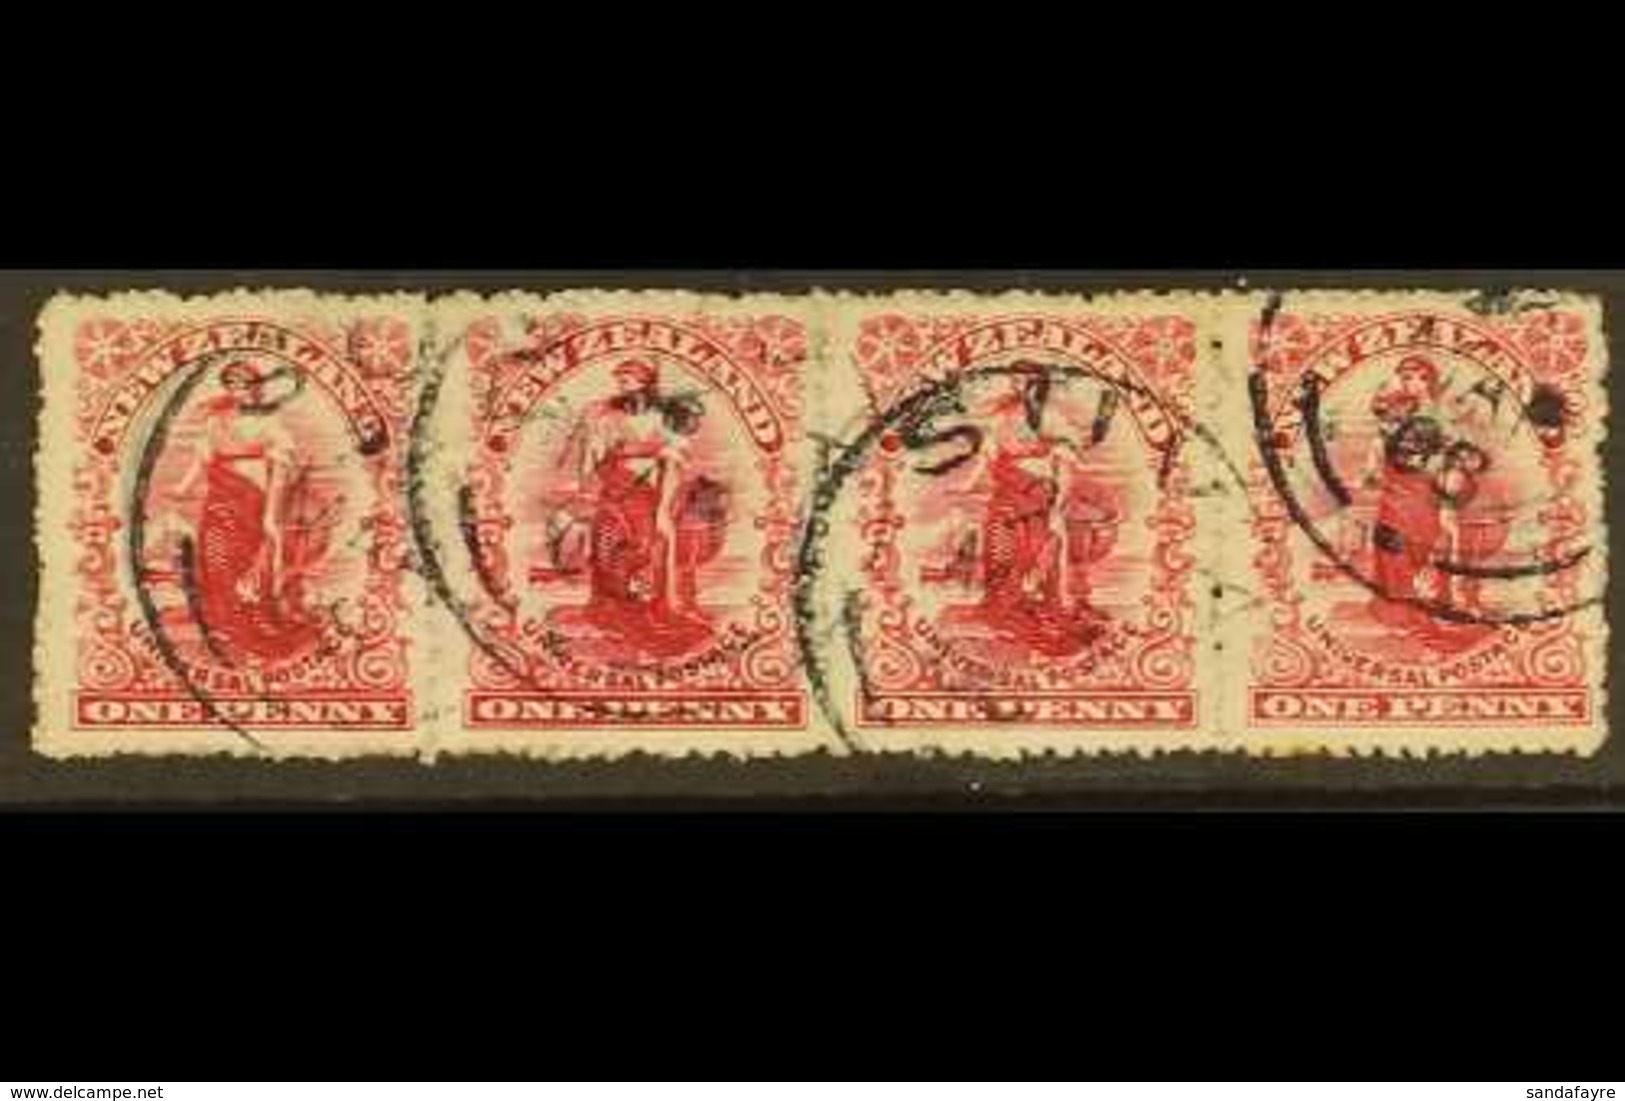 NEW ZEALAND USED IN. NZ 1901 1d Carmine "Universal" STRIP OF FOUR Each Cancelled By SUVA 23 Mar 1908 Cds. Most Unusual ( - Fidji (...-1970)